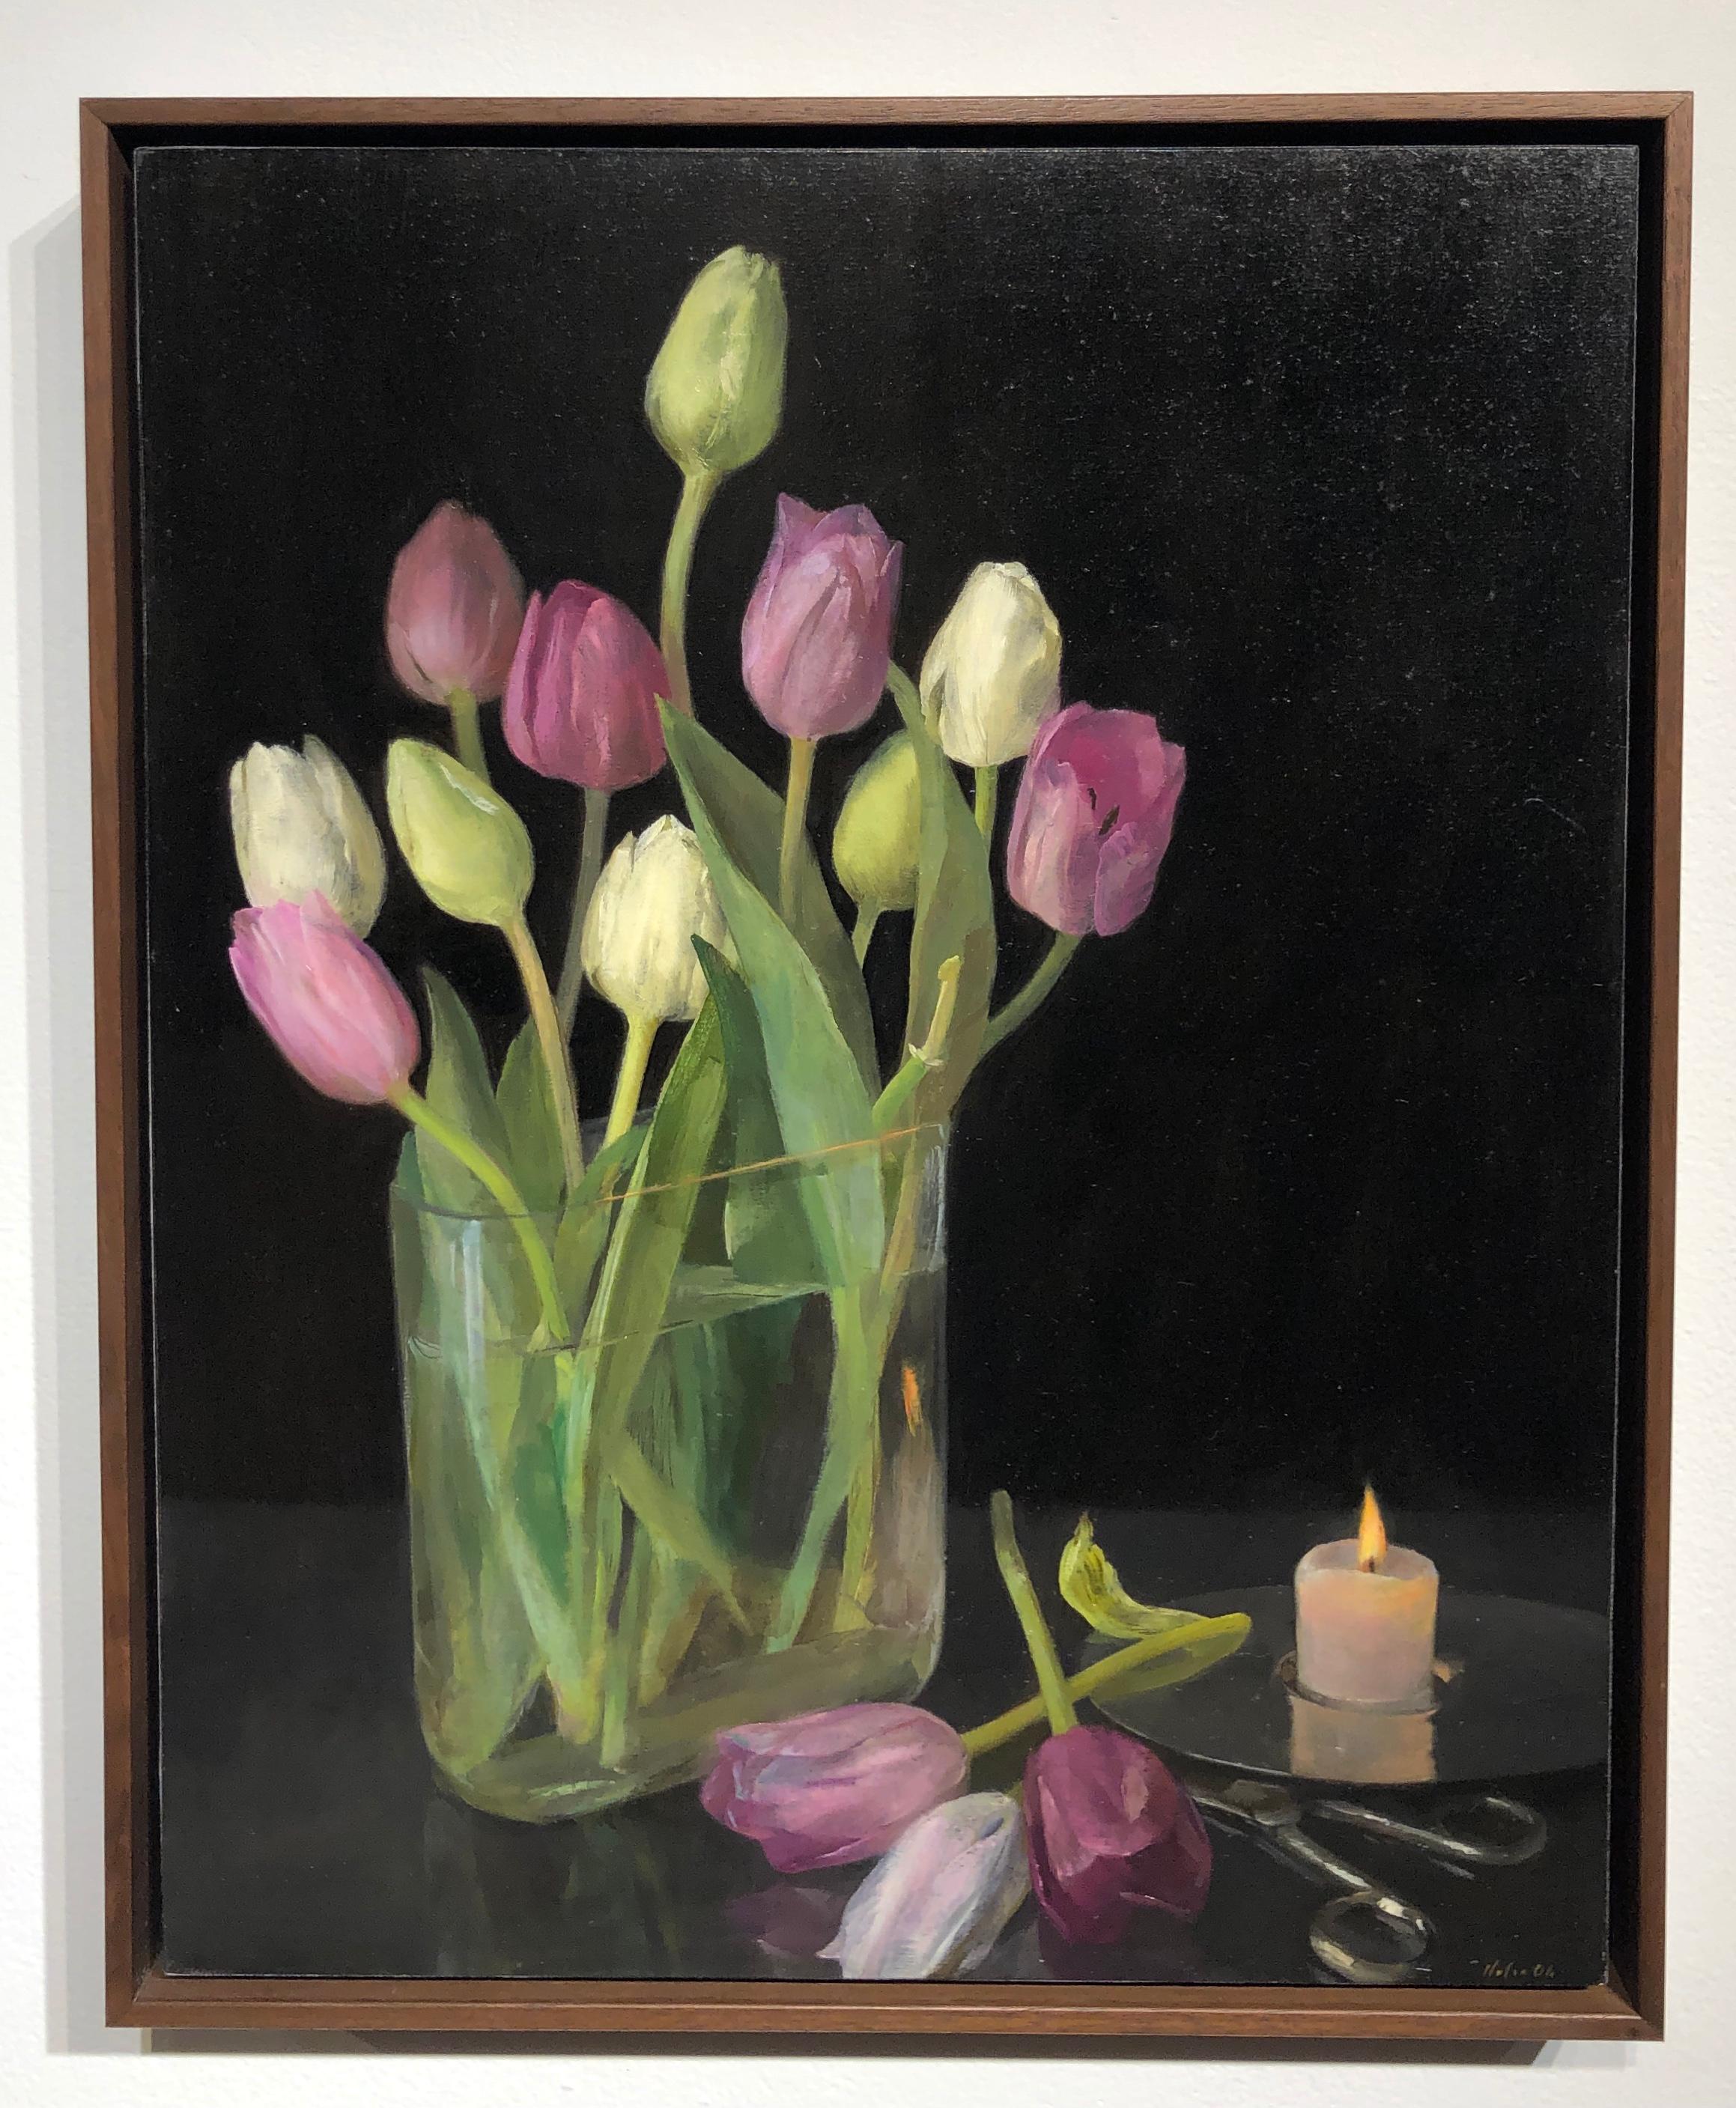 Still Life with Tulips, Glass Vase of Pastel Tulips, Scissors & Burning Candle - Painting by Helen Oh